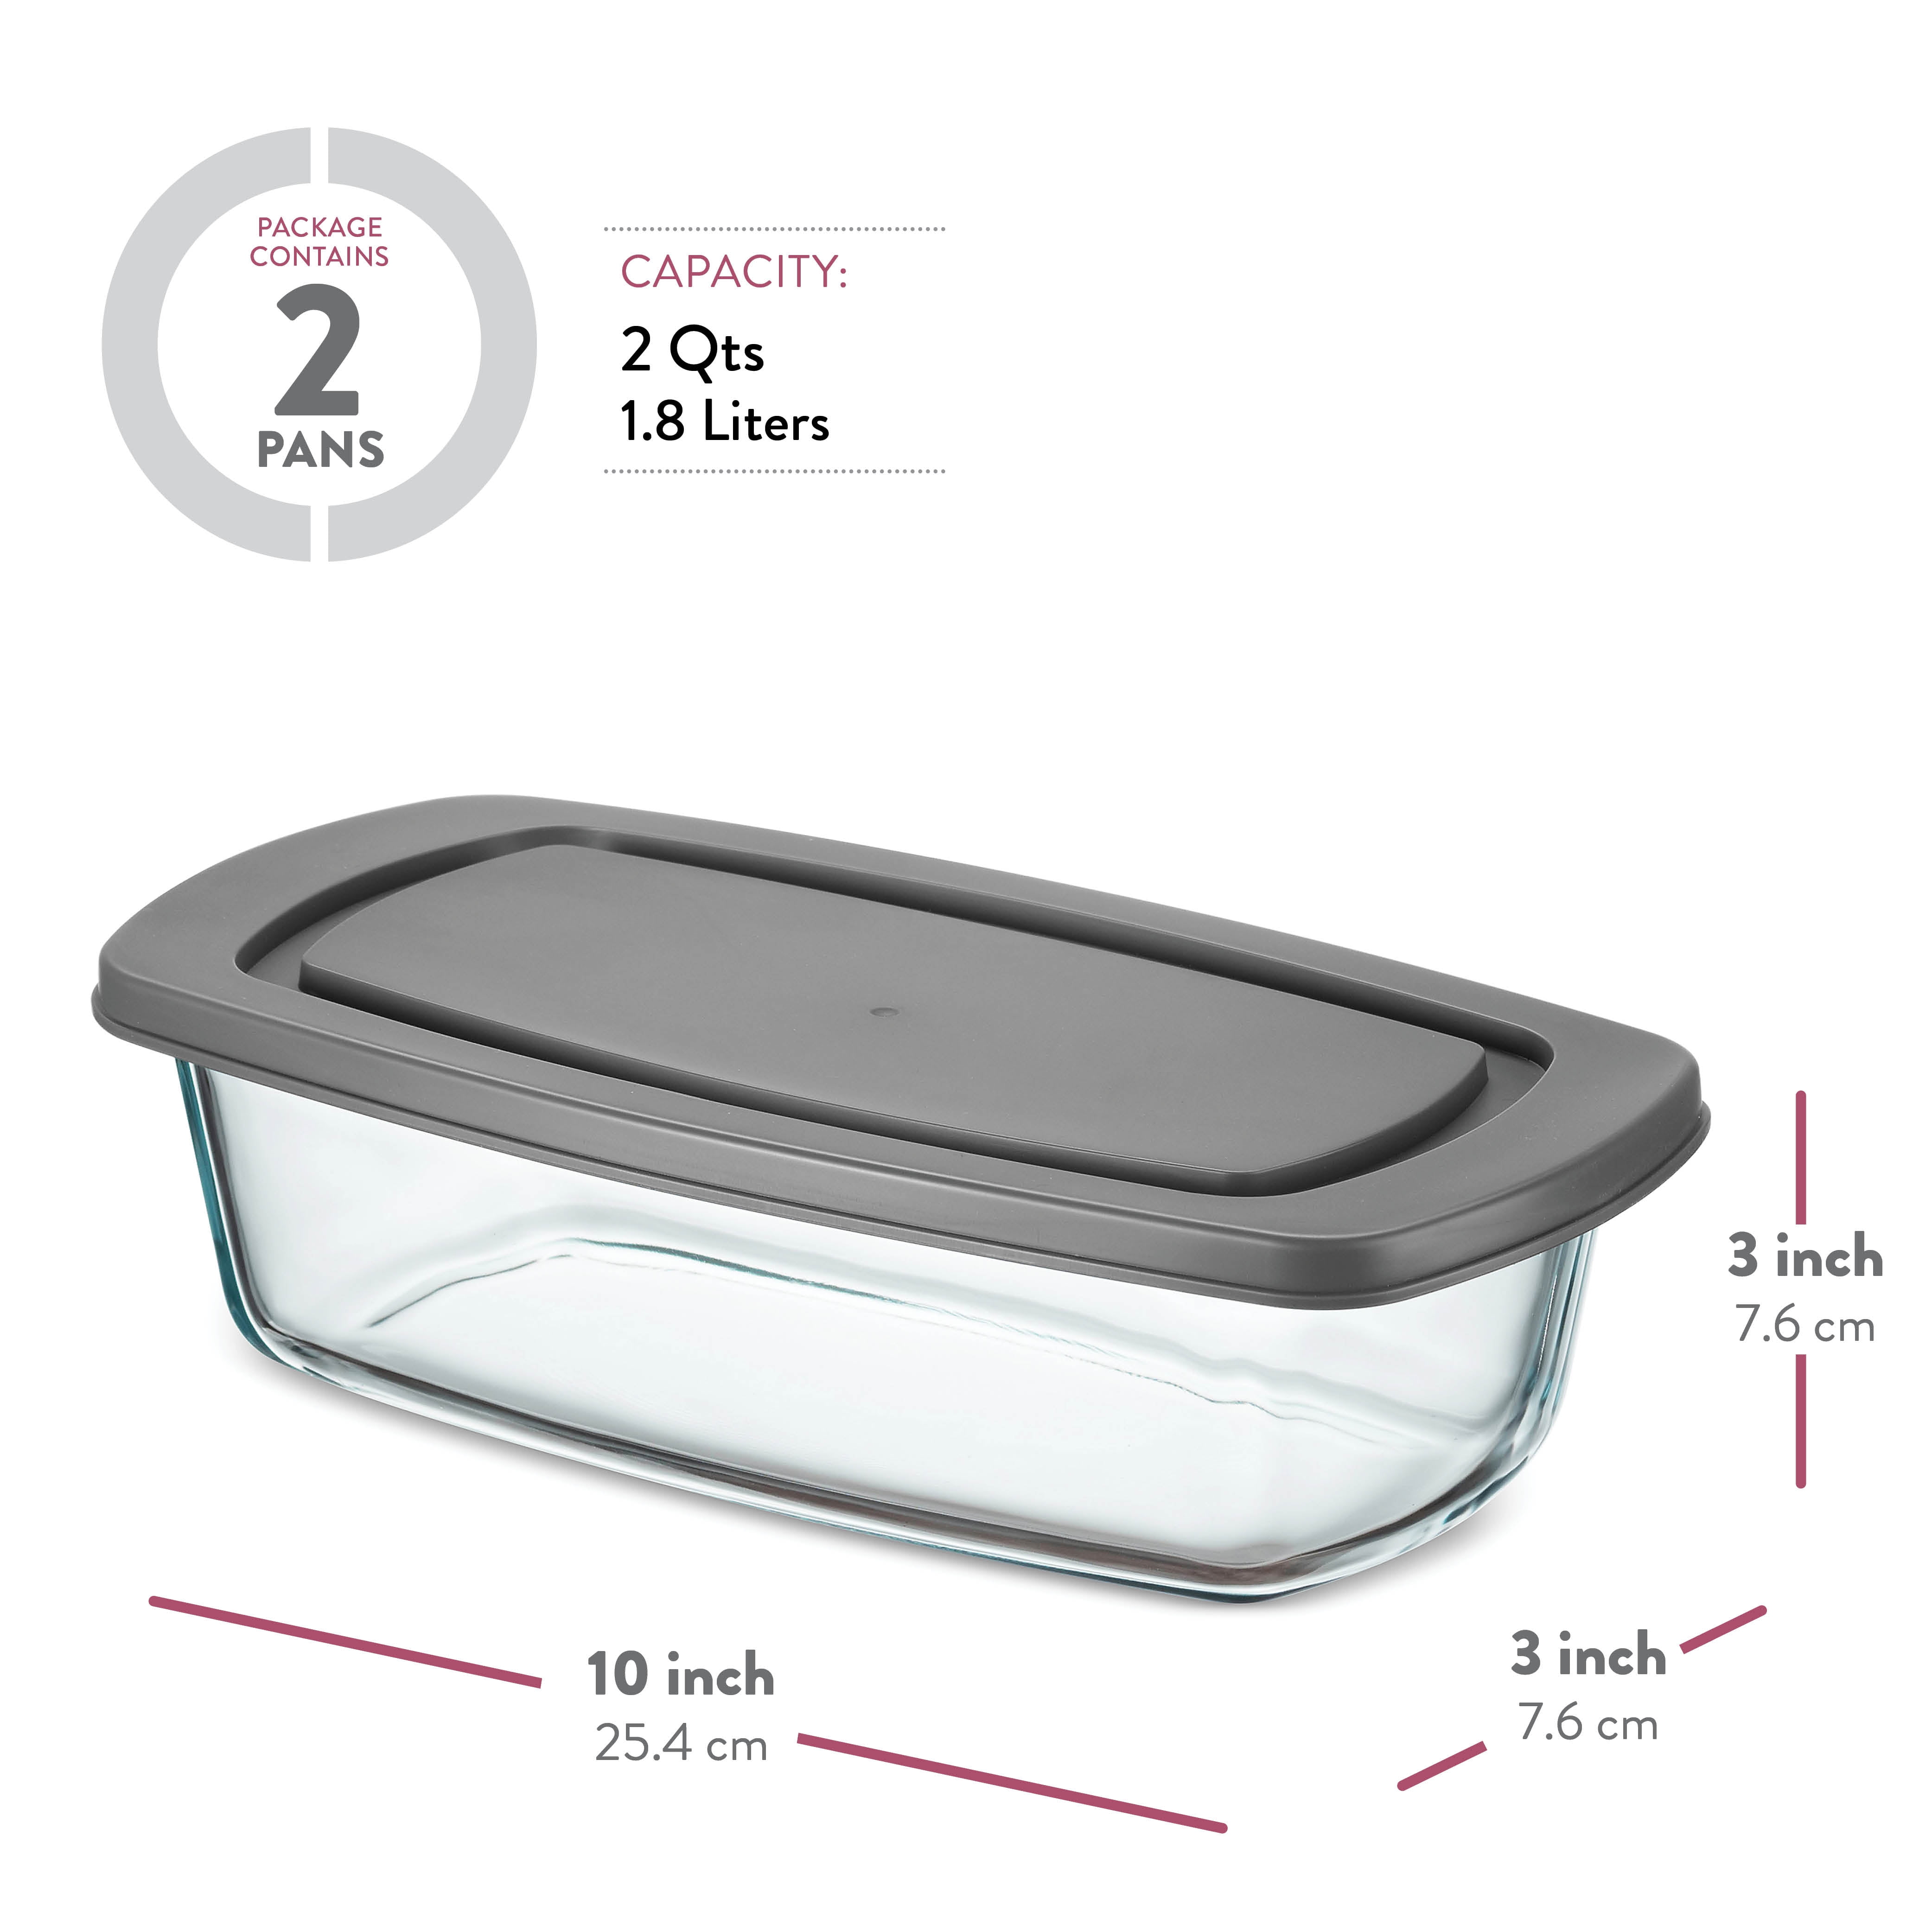 Luxshiny 2pcs Box Covered Baking Tray Cake Dish with Cover Bread Loaf Pans  for Baking Box with Lid Baking Tray for Restaurant Baking Tray for Kitchen